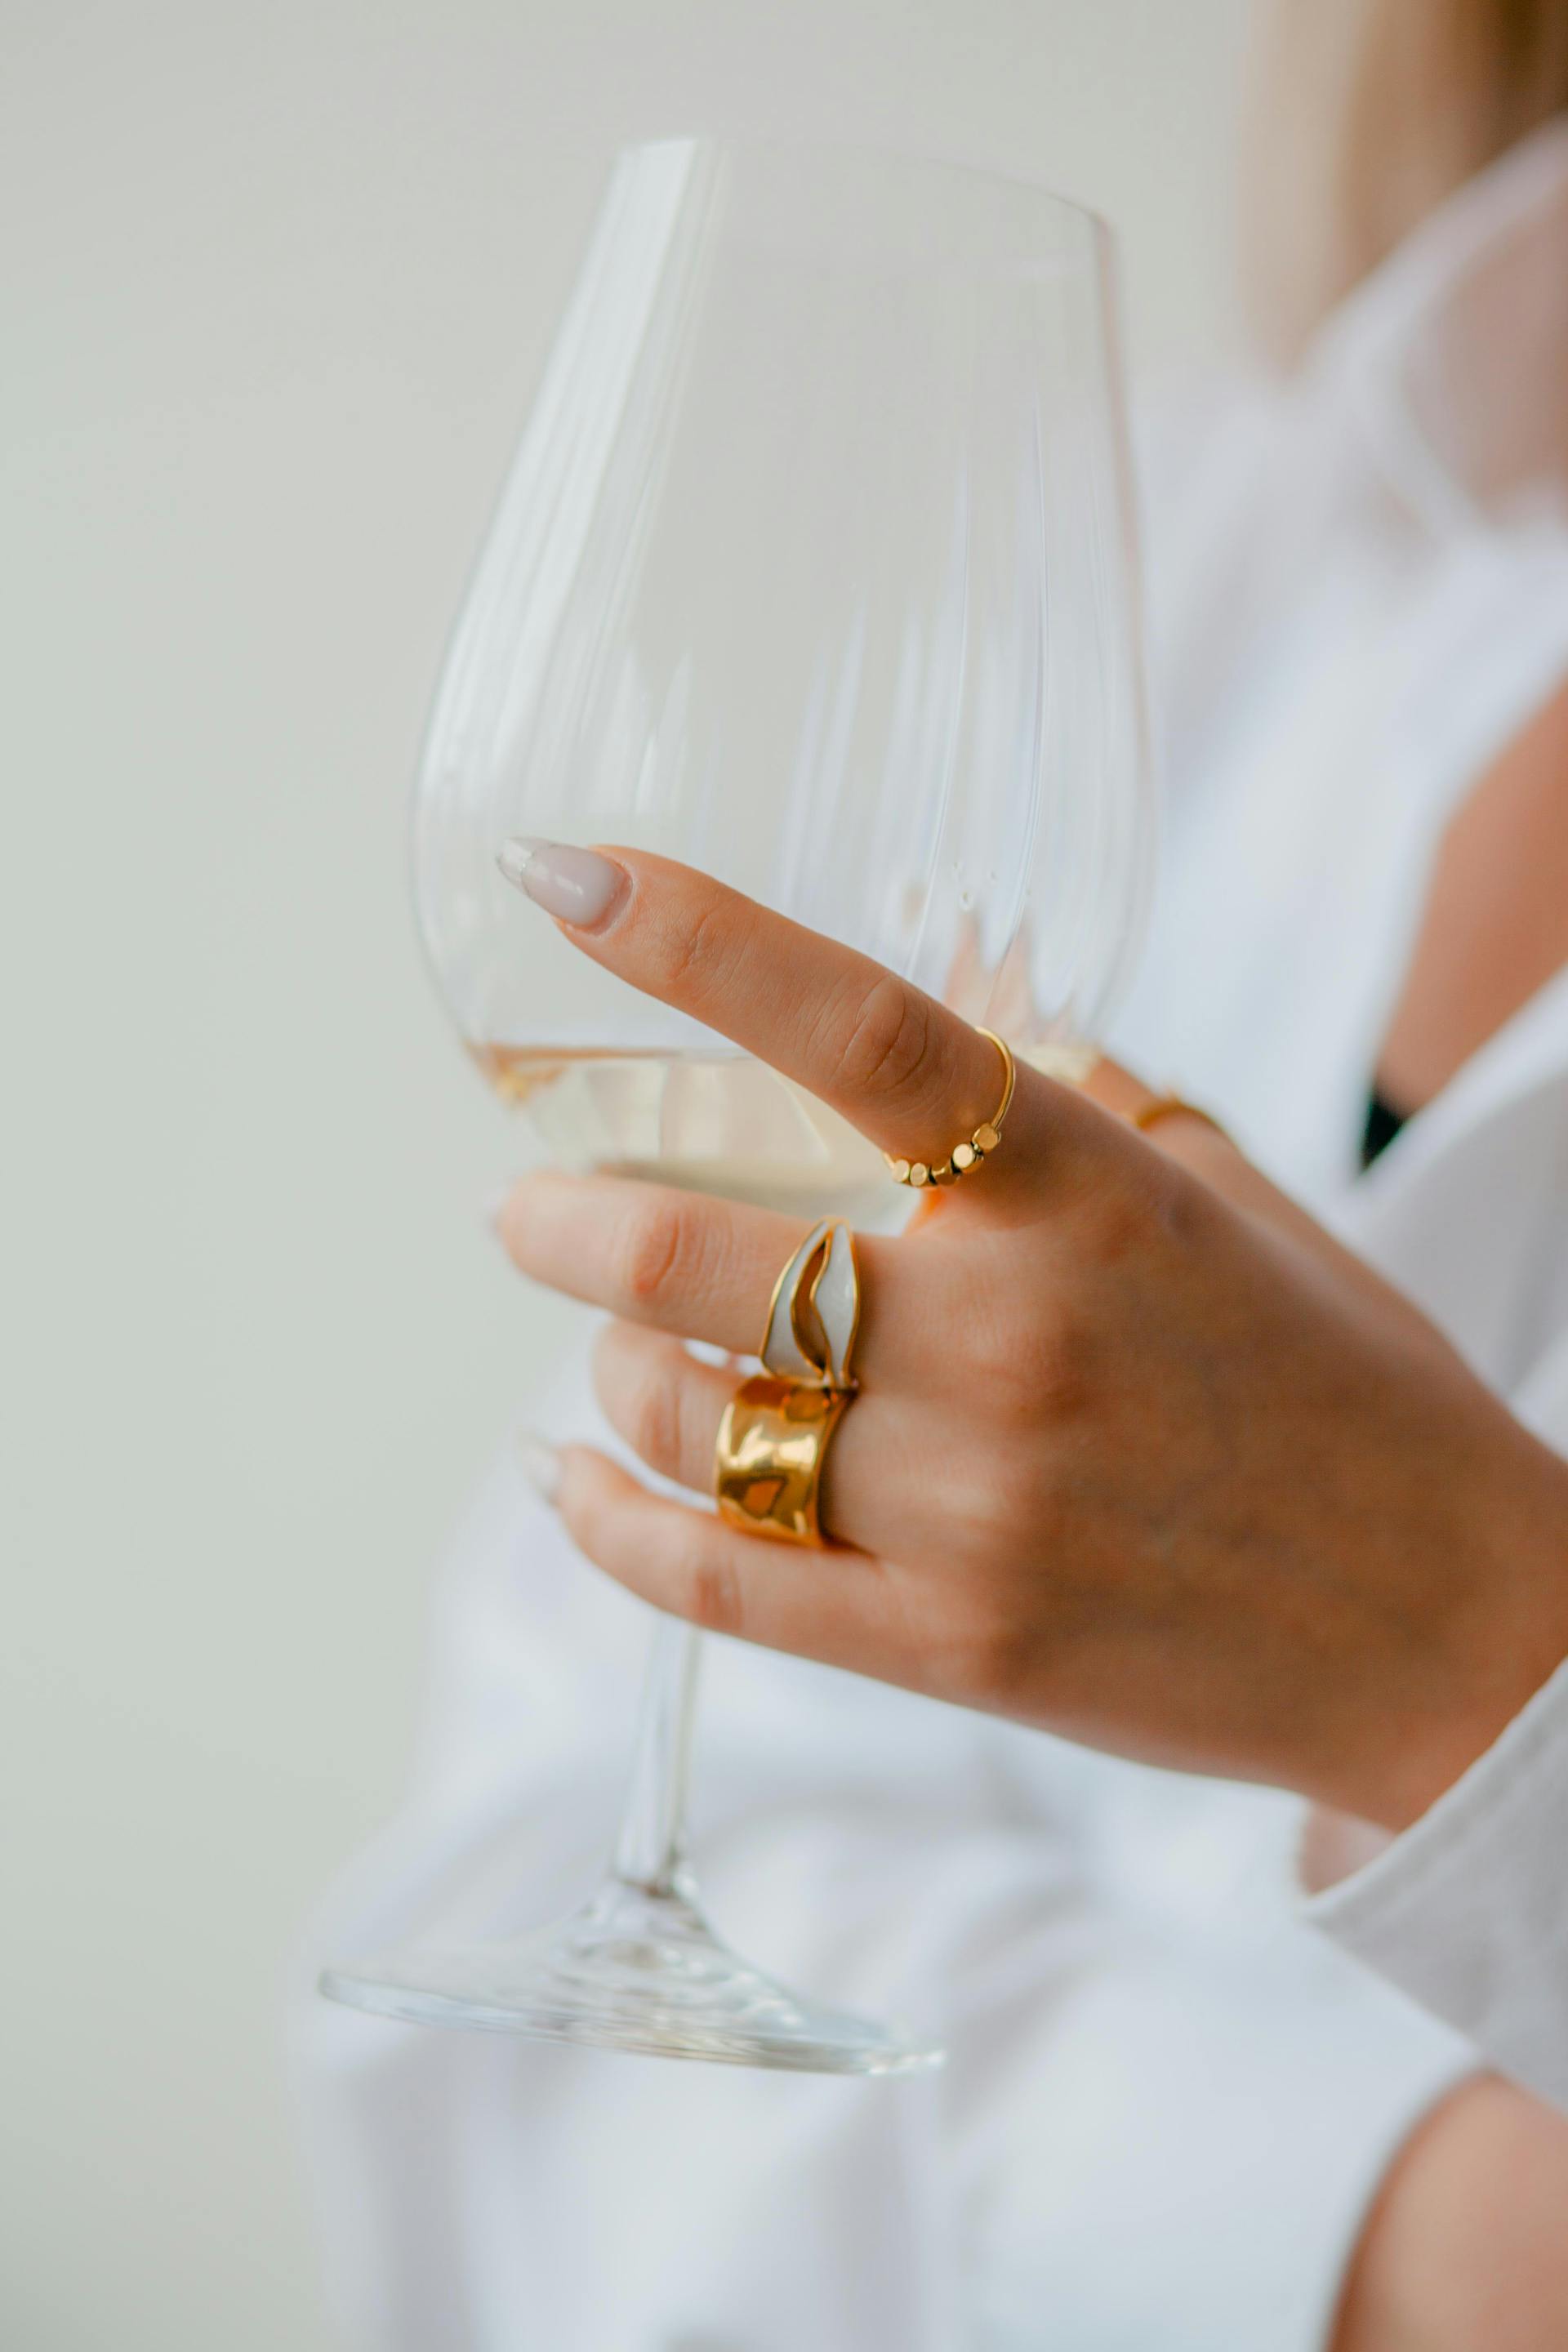 A woman holding a glass of champagne | Source: Pexels